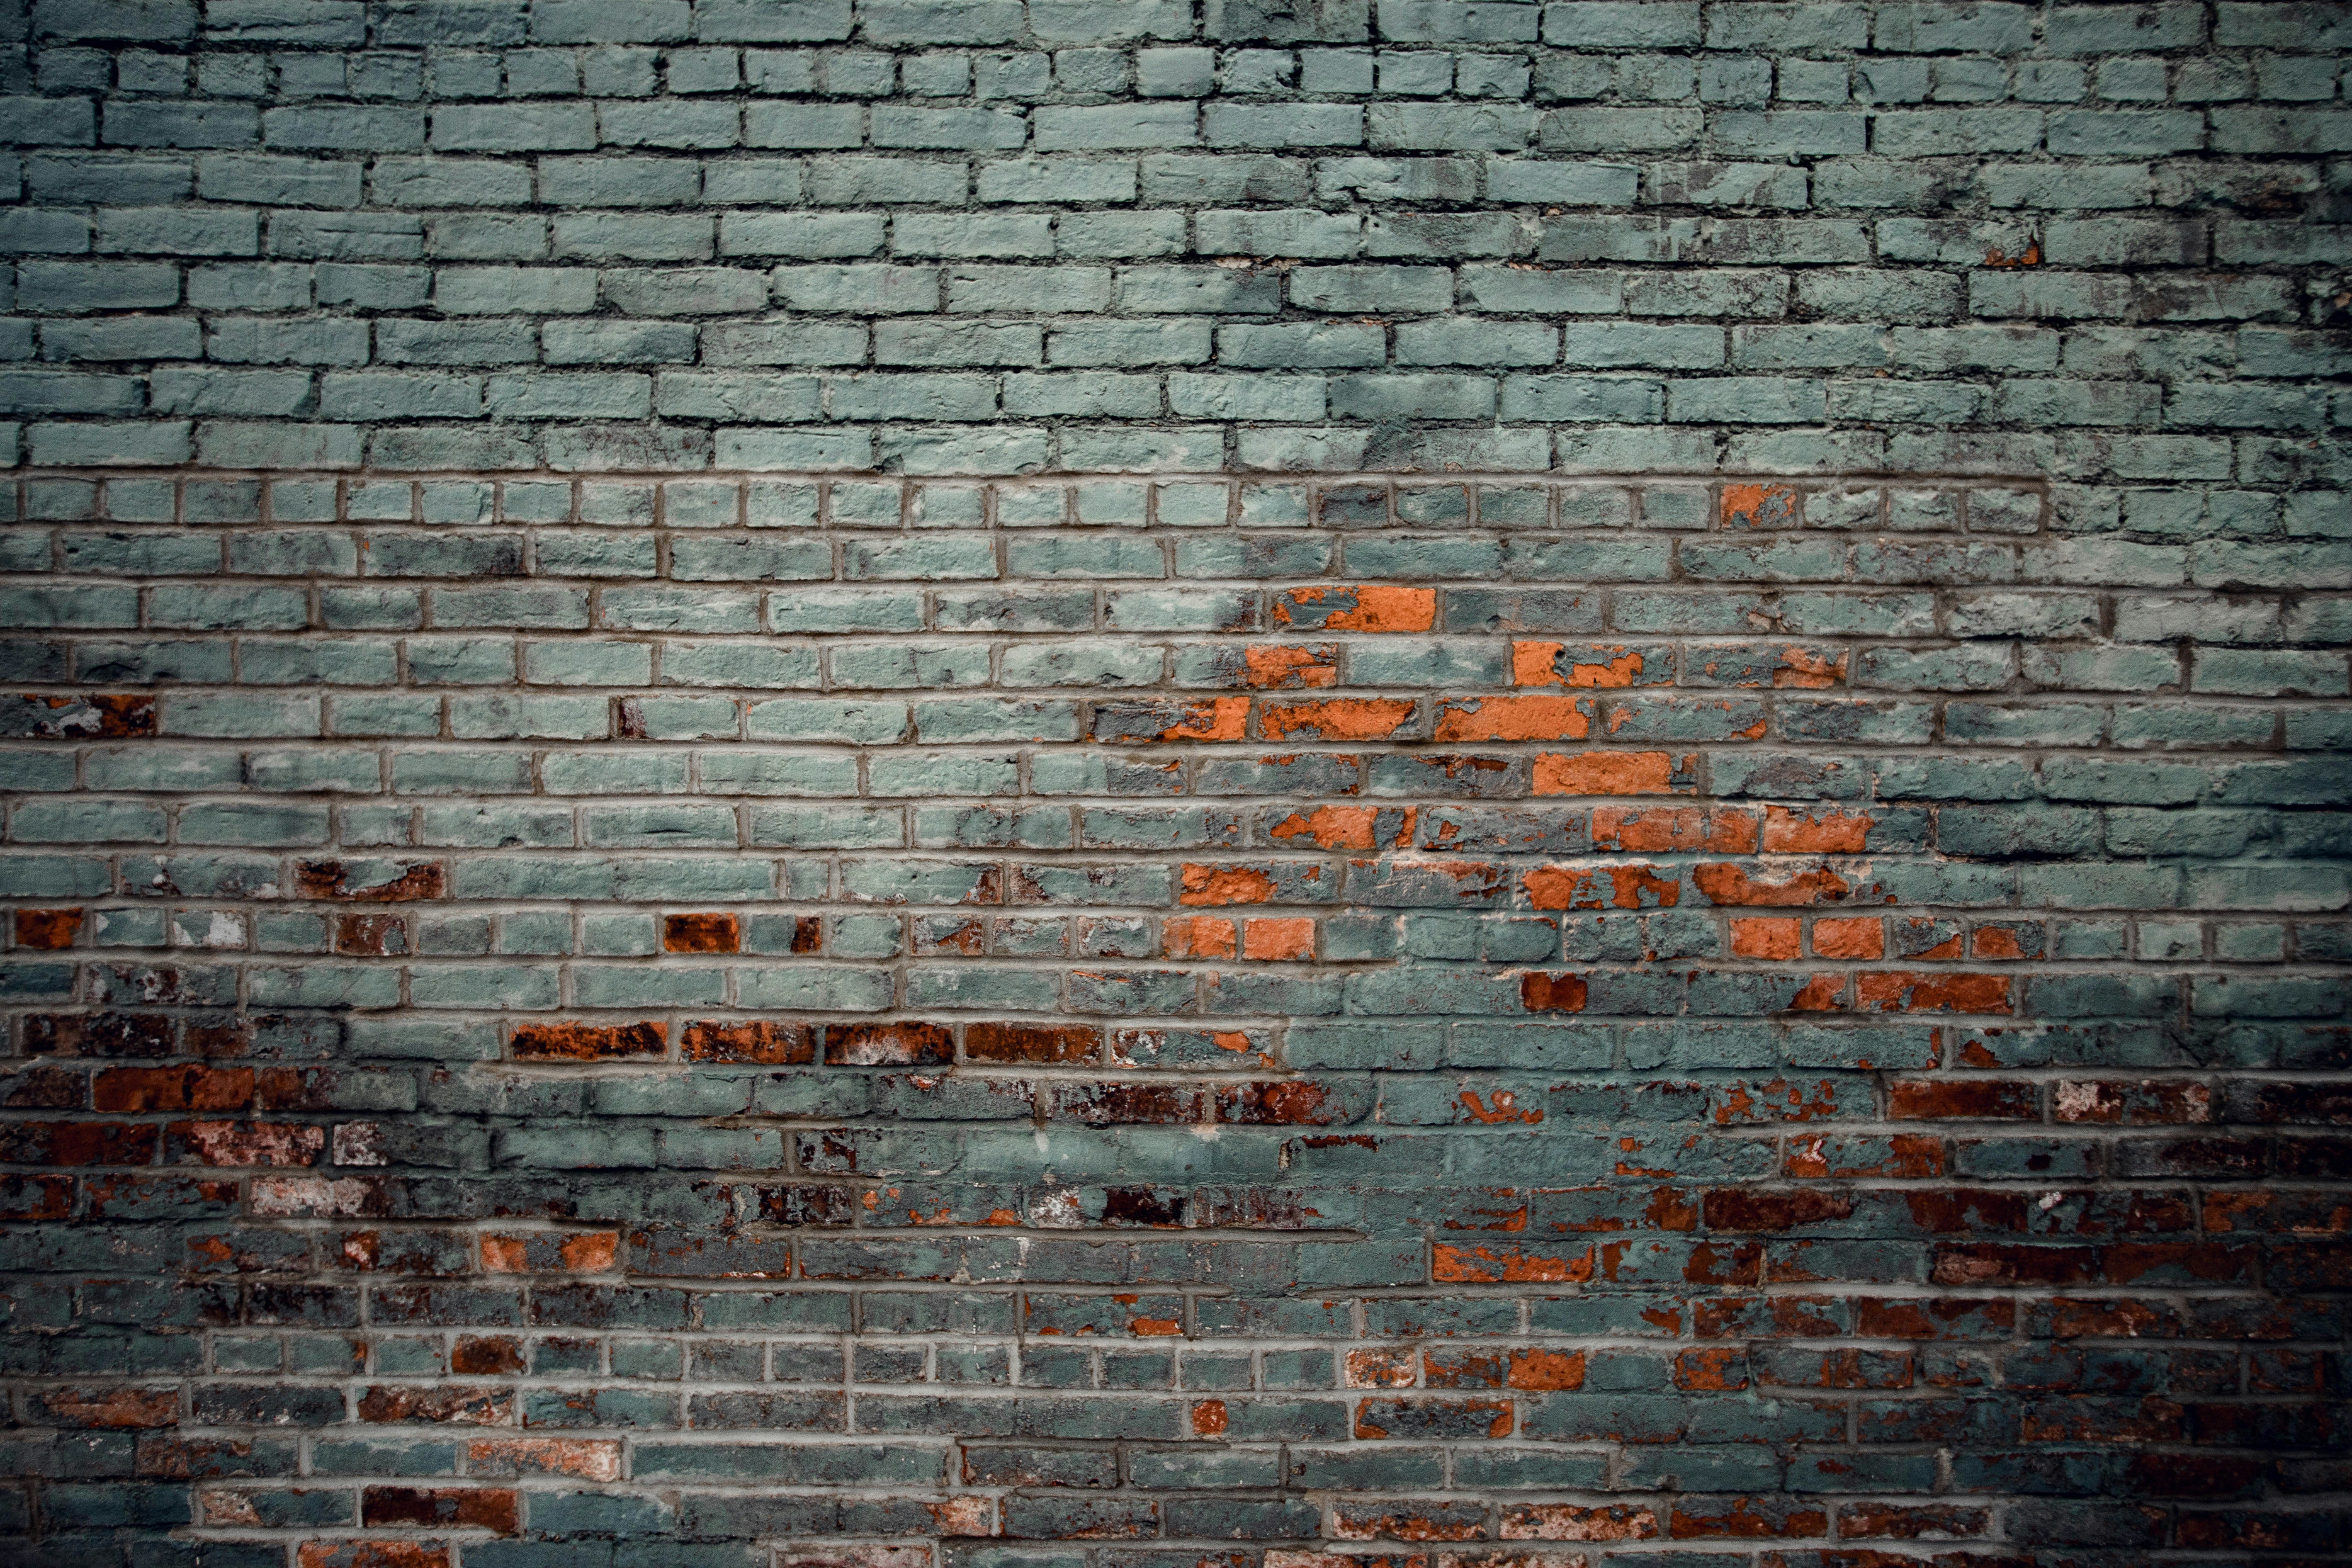 The fun thing about old towns are the vintage scenes. This brick wall is a great texture.